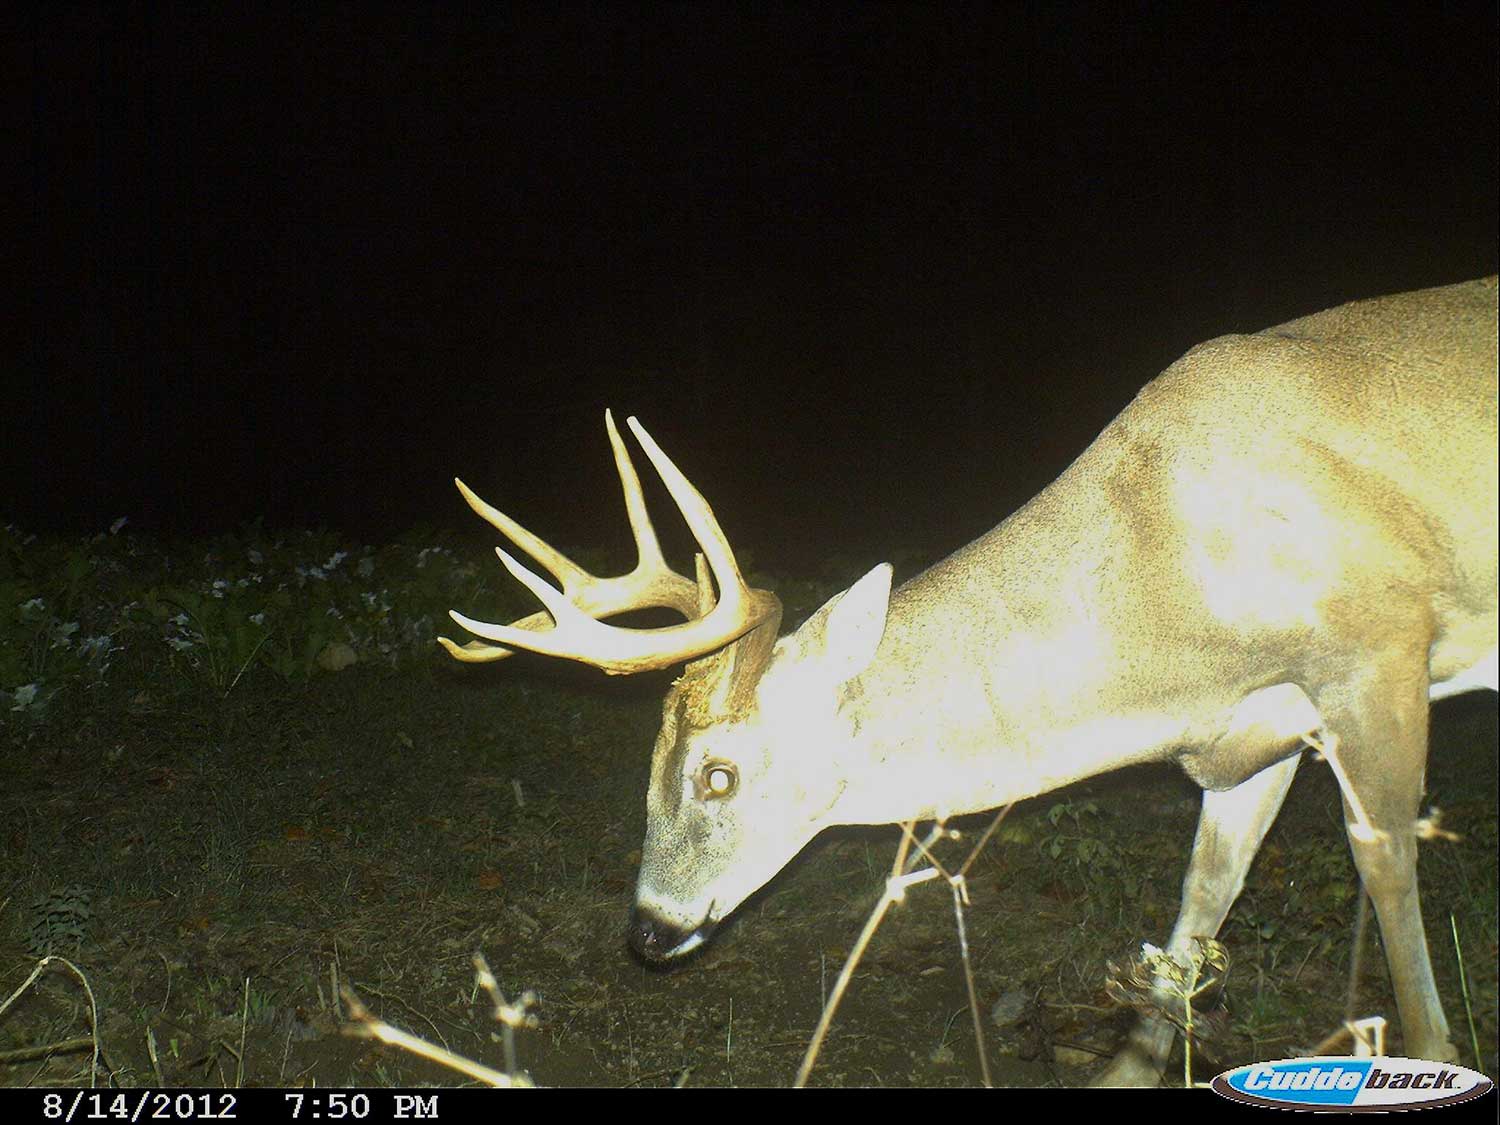 A trail camera photograph of a whitetail buck in the nighttime.